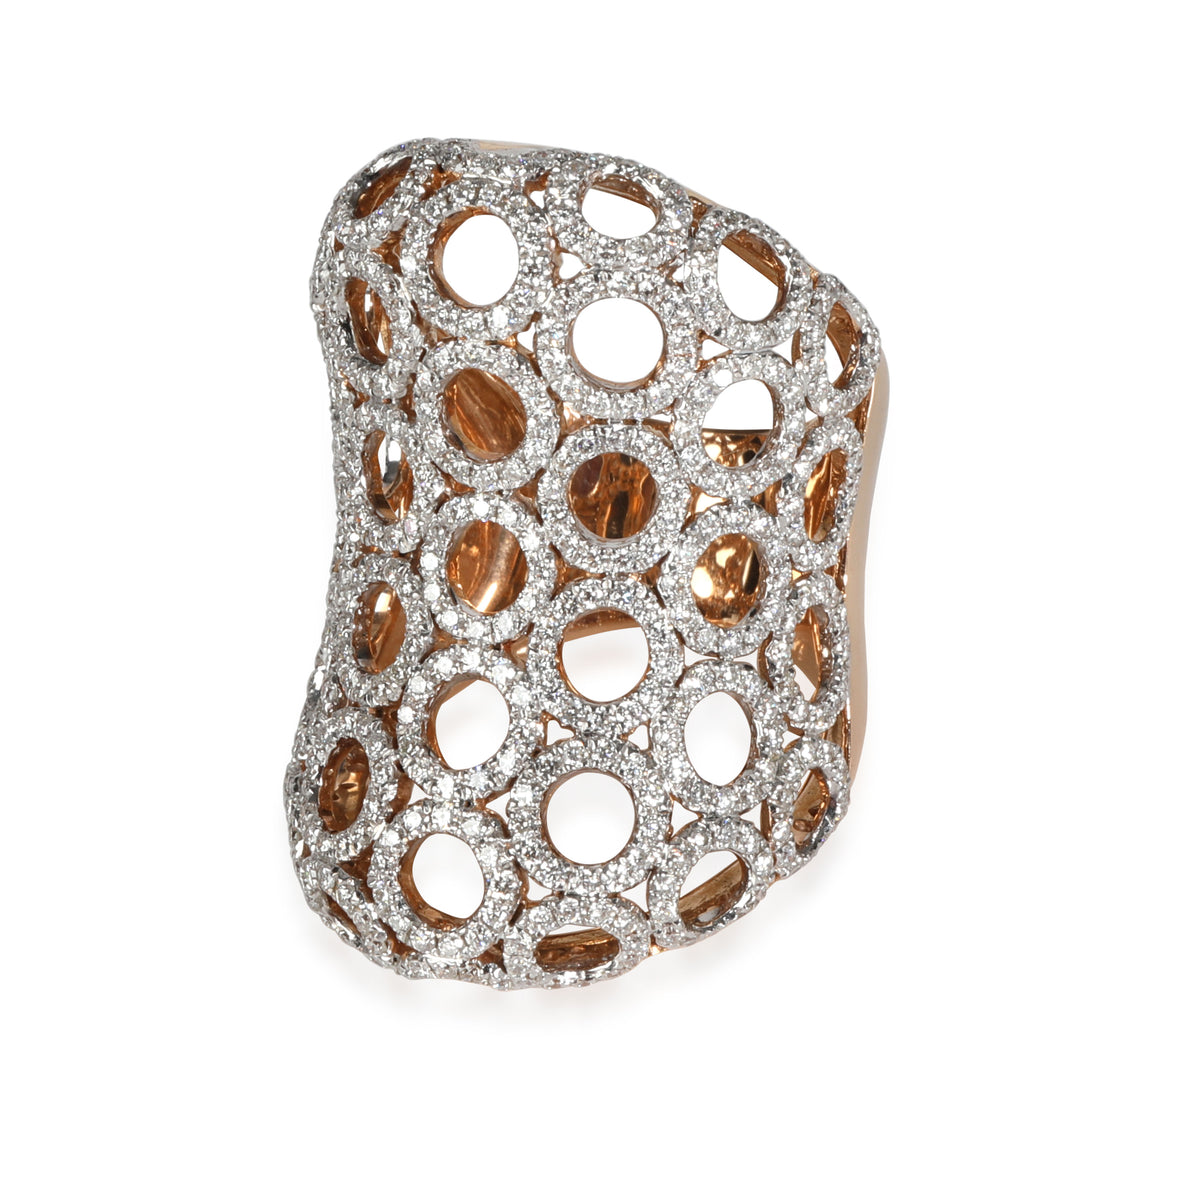 Dynasty Linked Circles Cocktail Ring in 18K Rose Gold 2.10 CTW